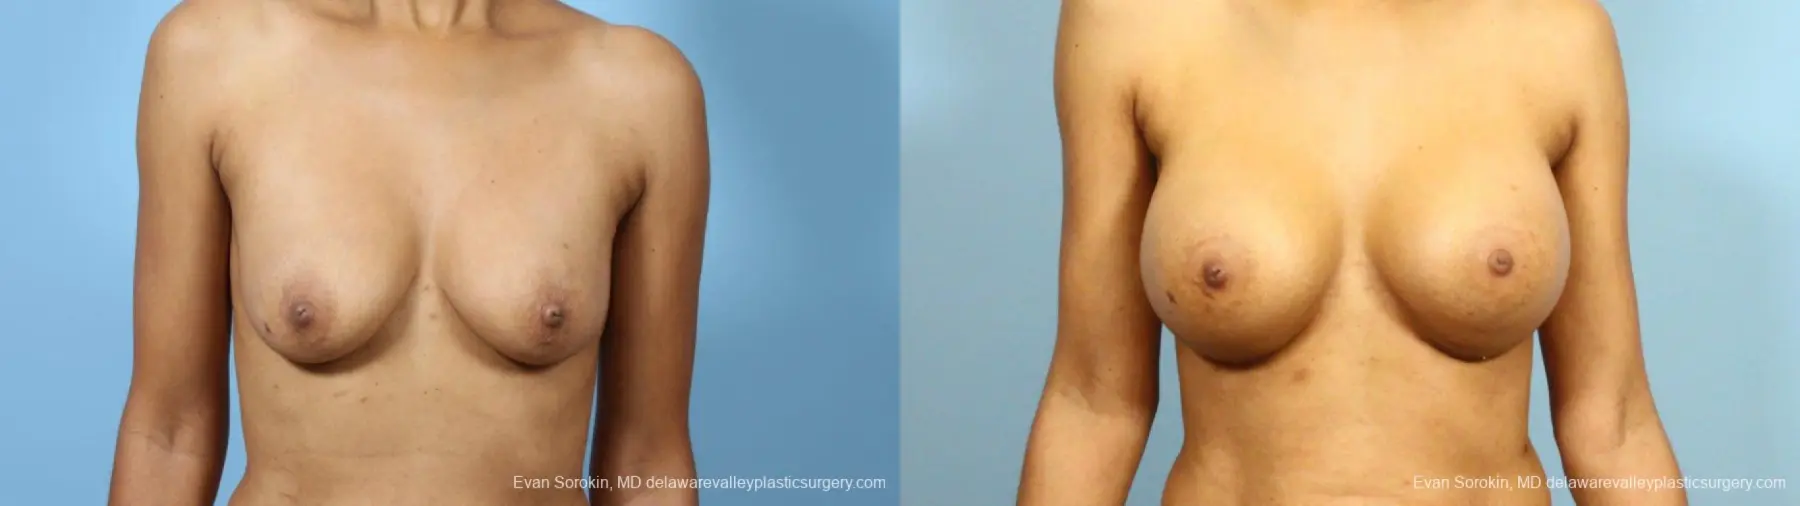 Philadelphia Breast Augmentation 9288 - Before and After 1